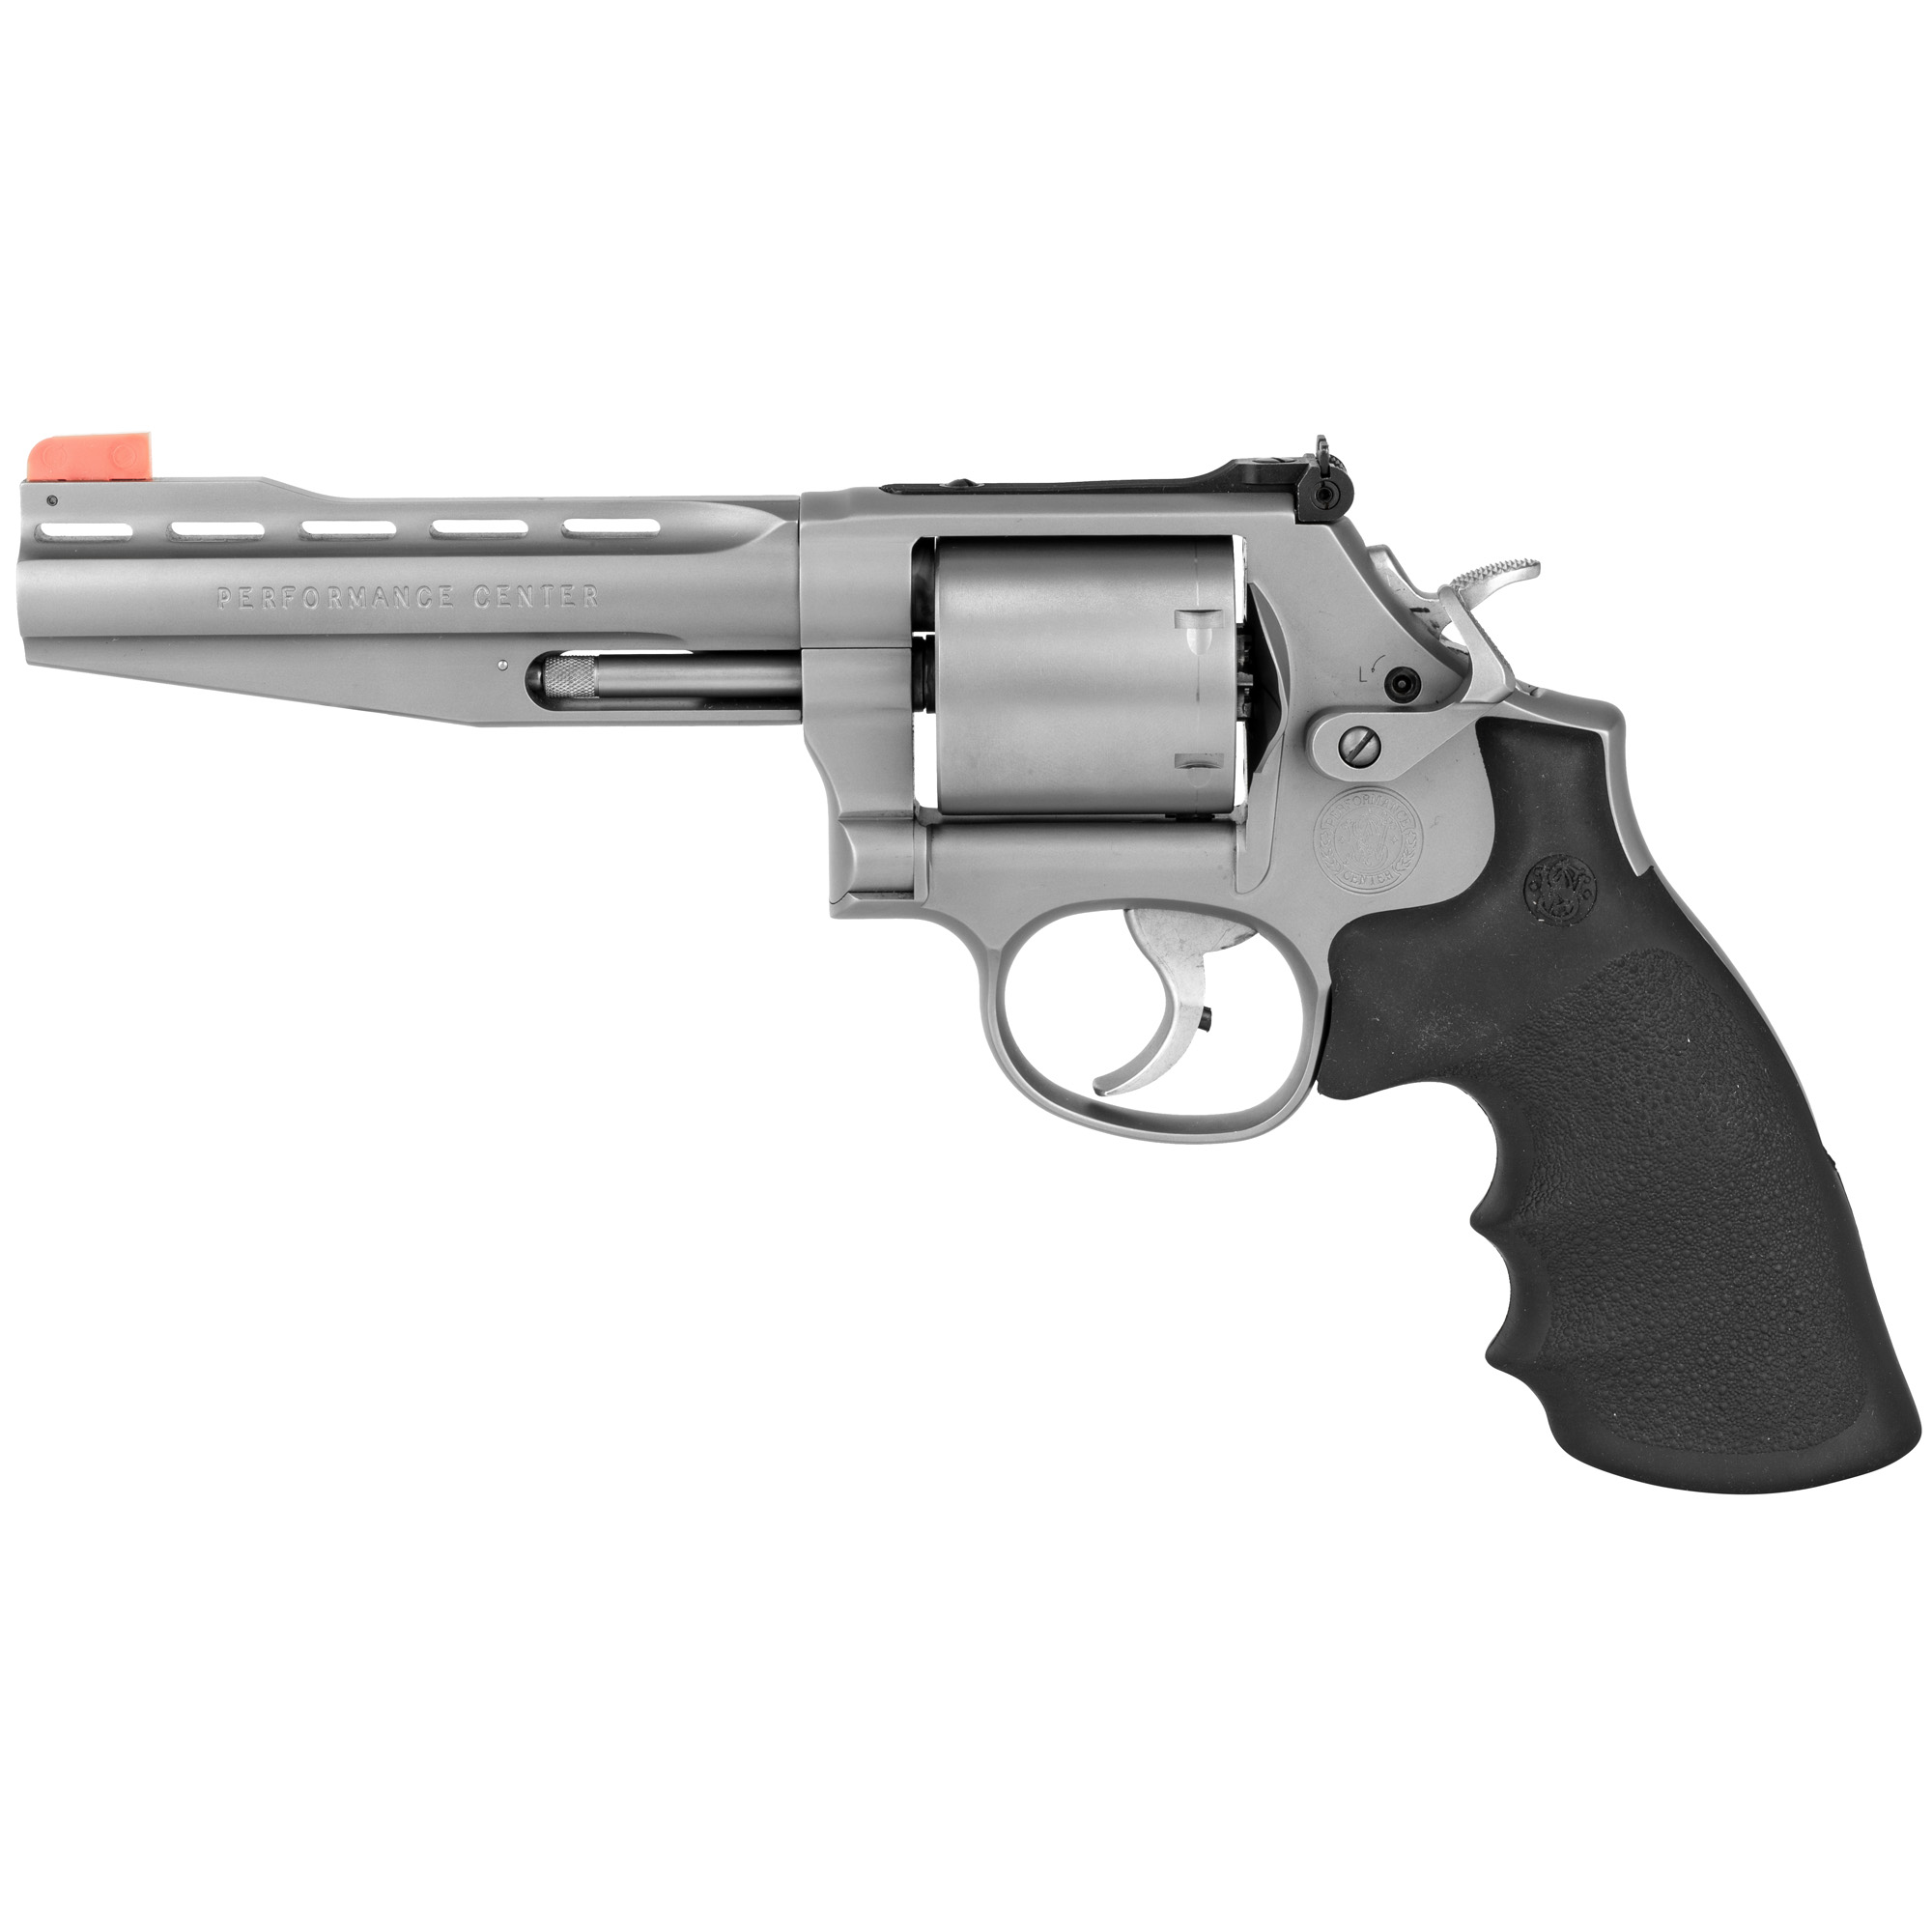 S&W PC 686 357MAG 4 6RD AS STS